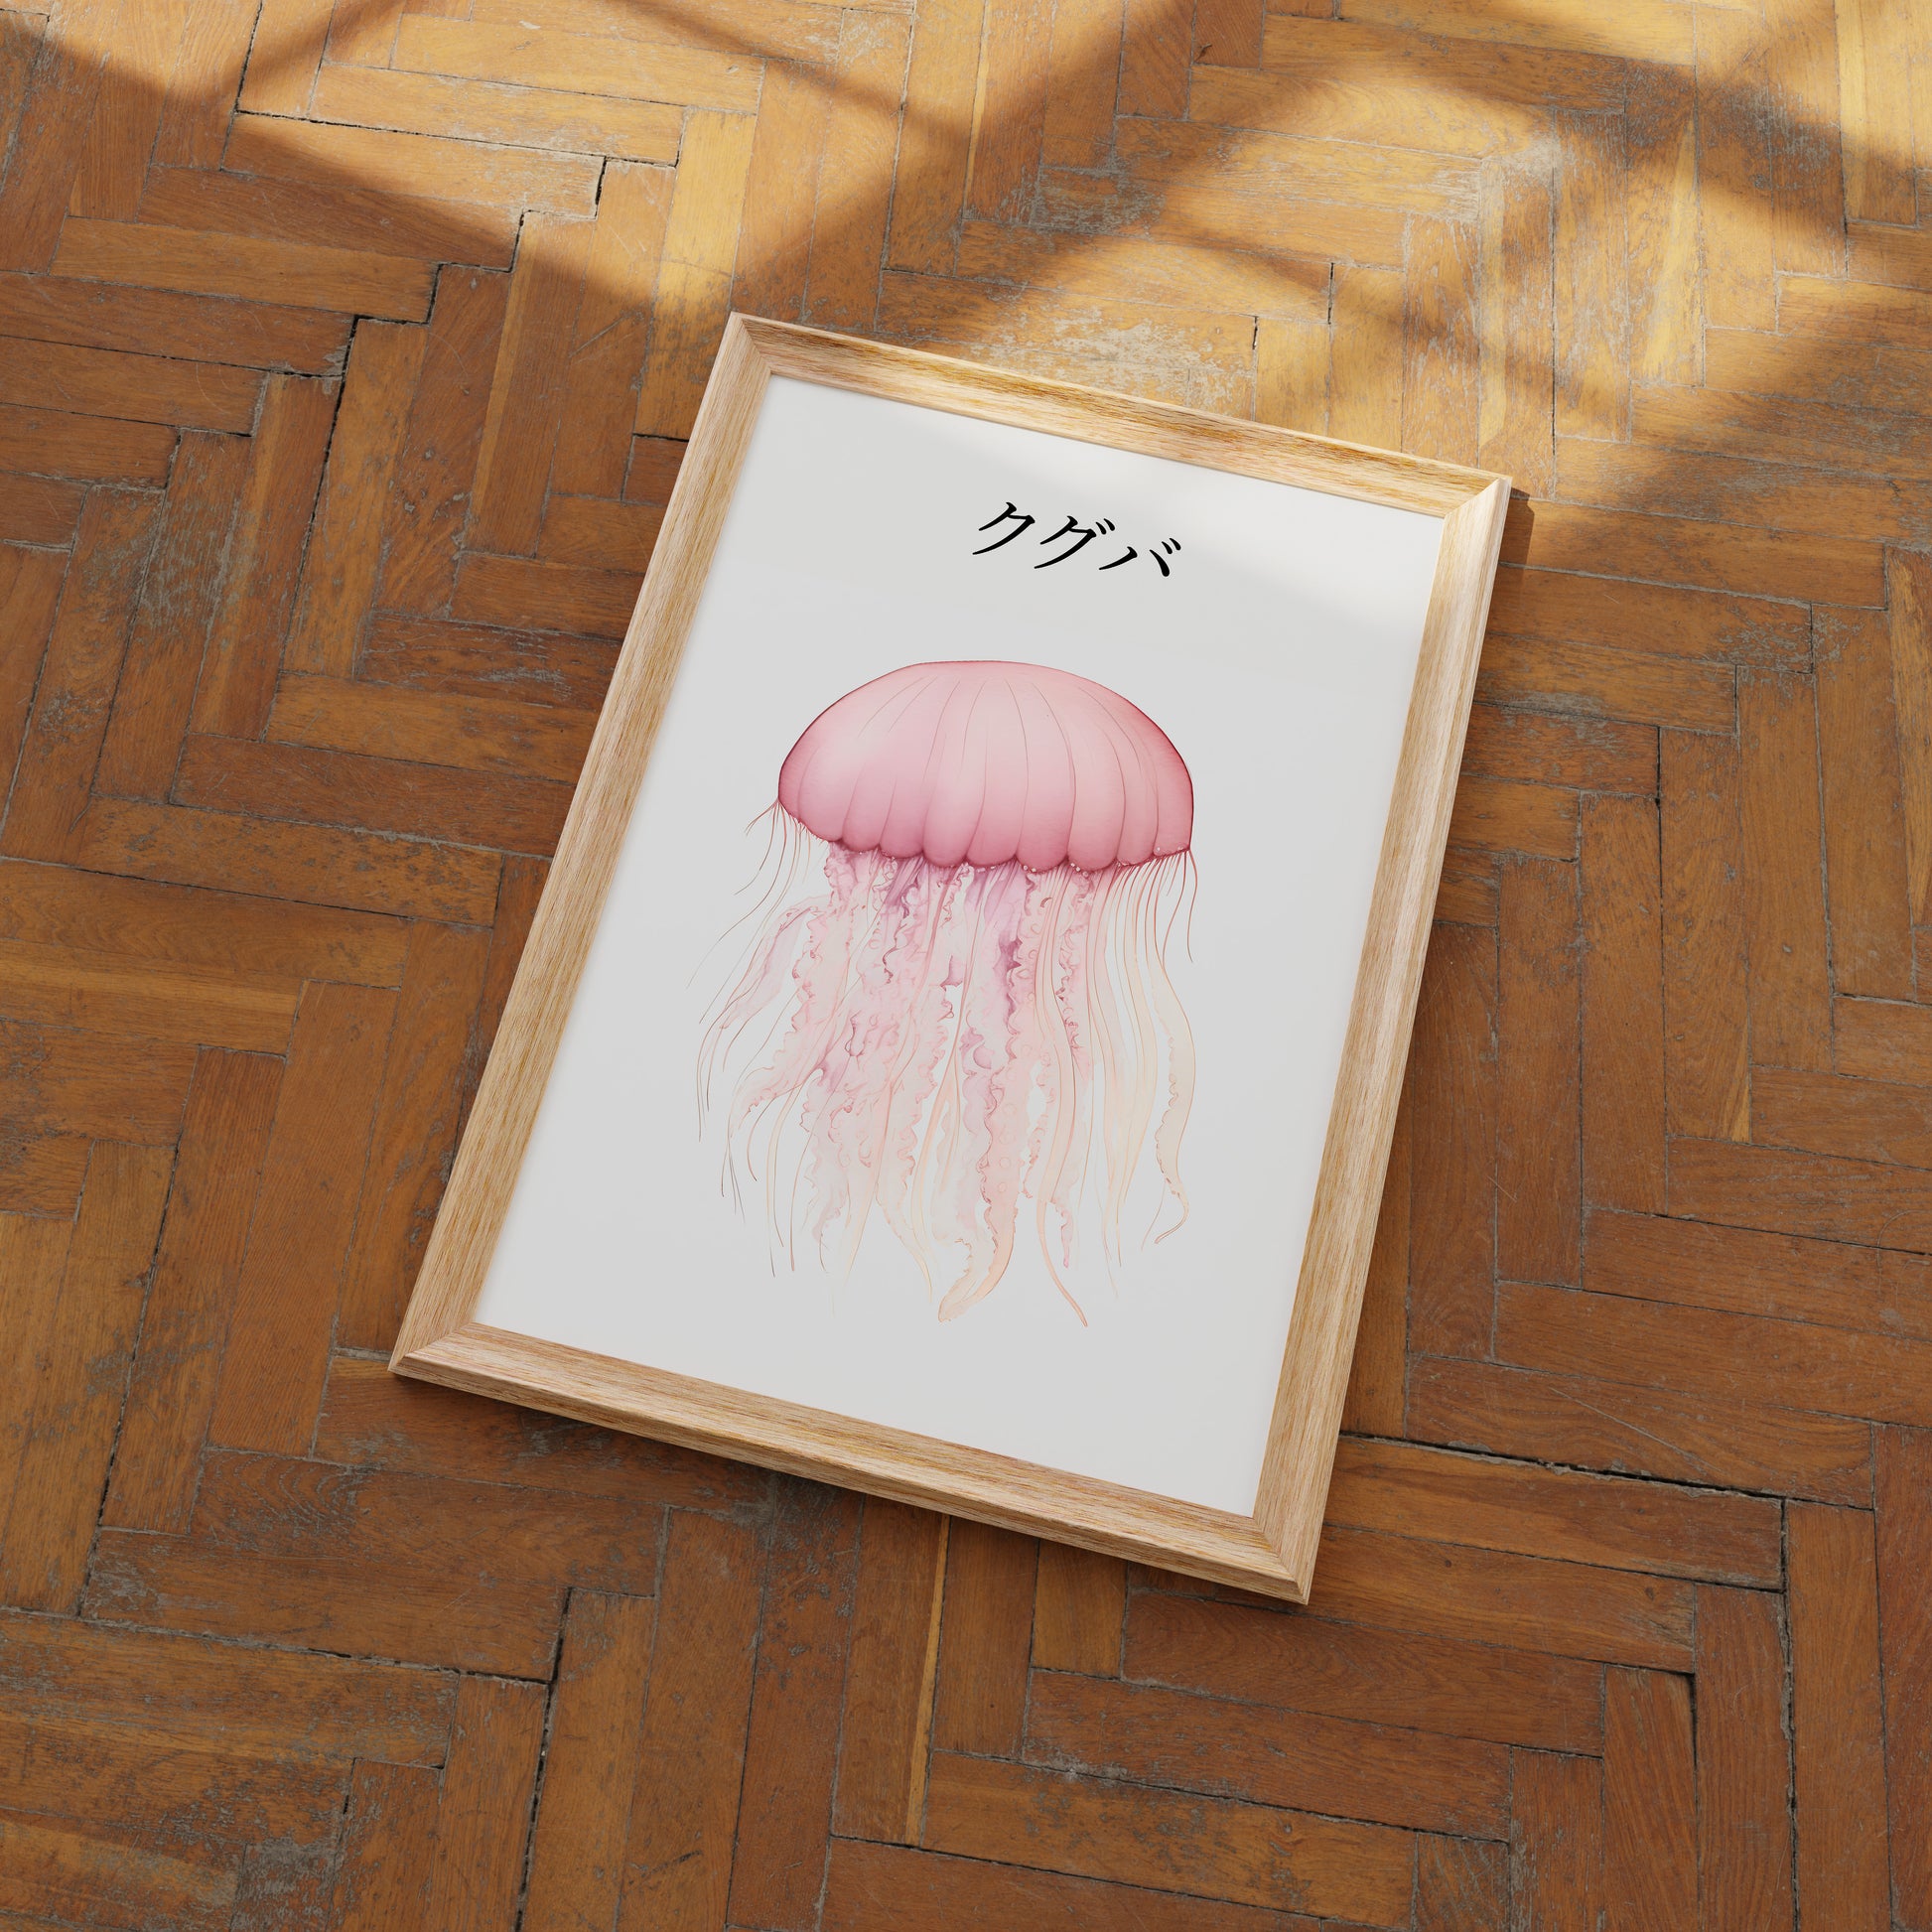 Framed illustration of a jellyfish on a wooden floor with Japanese text above it.